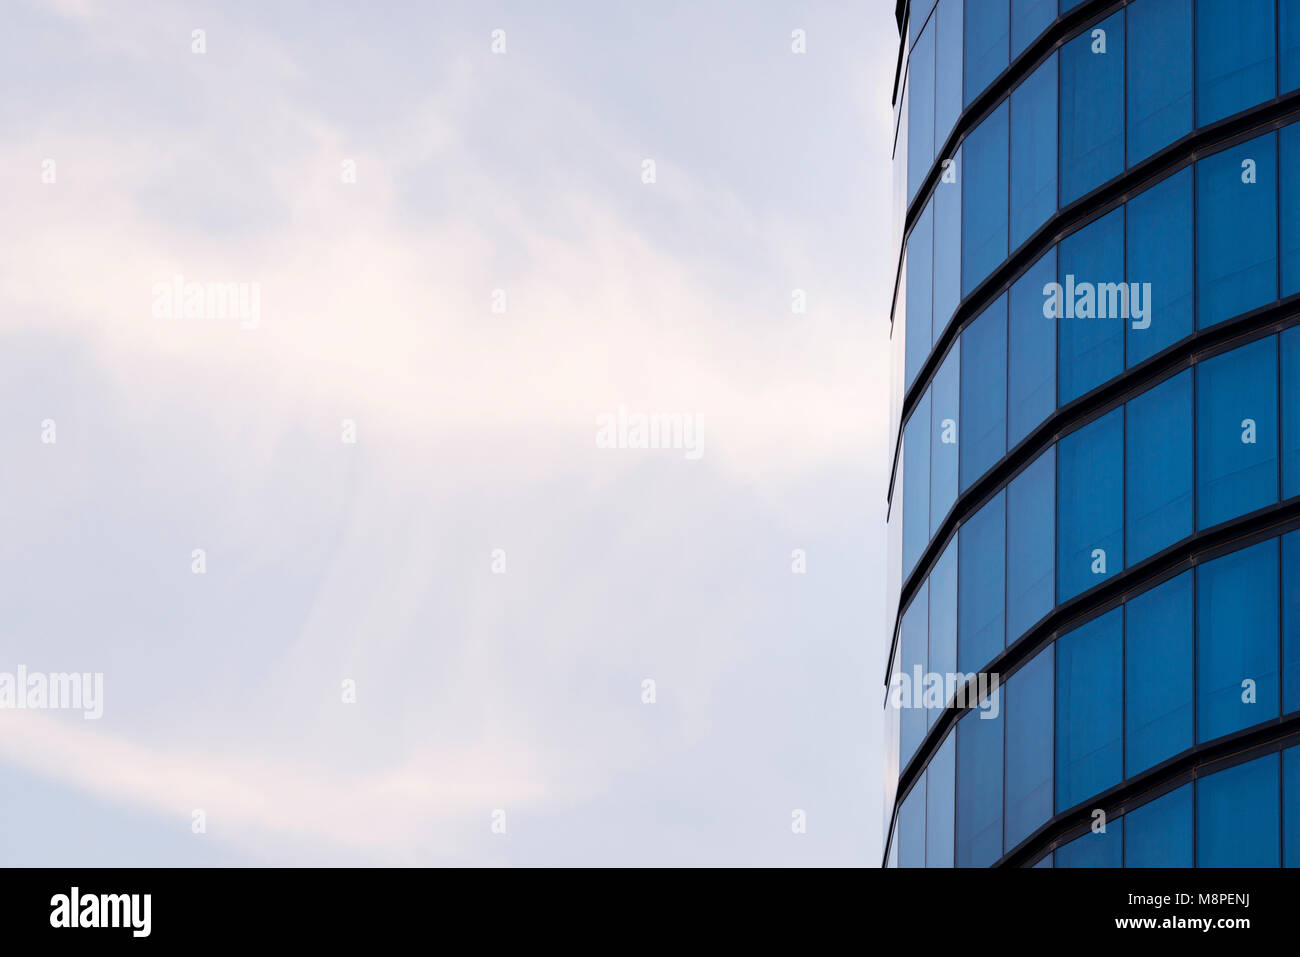 Blue windows of a cylindrical building background texture. Stock Photo